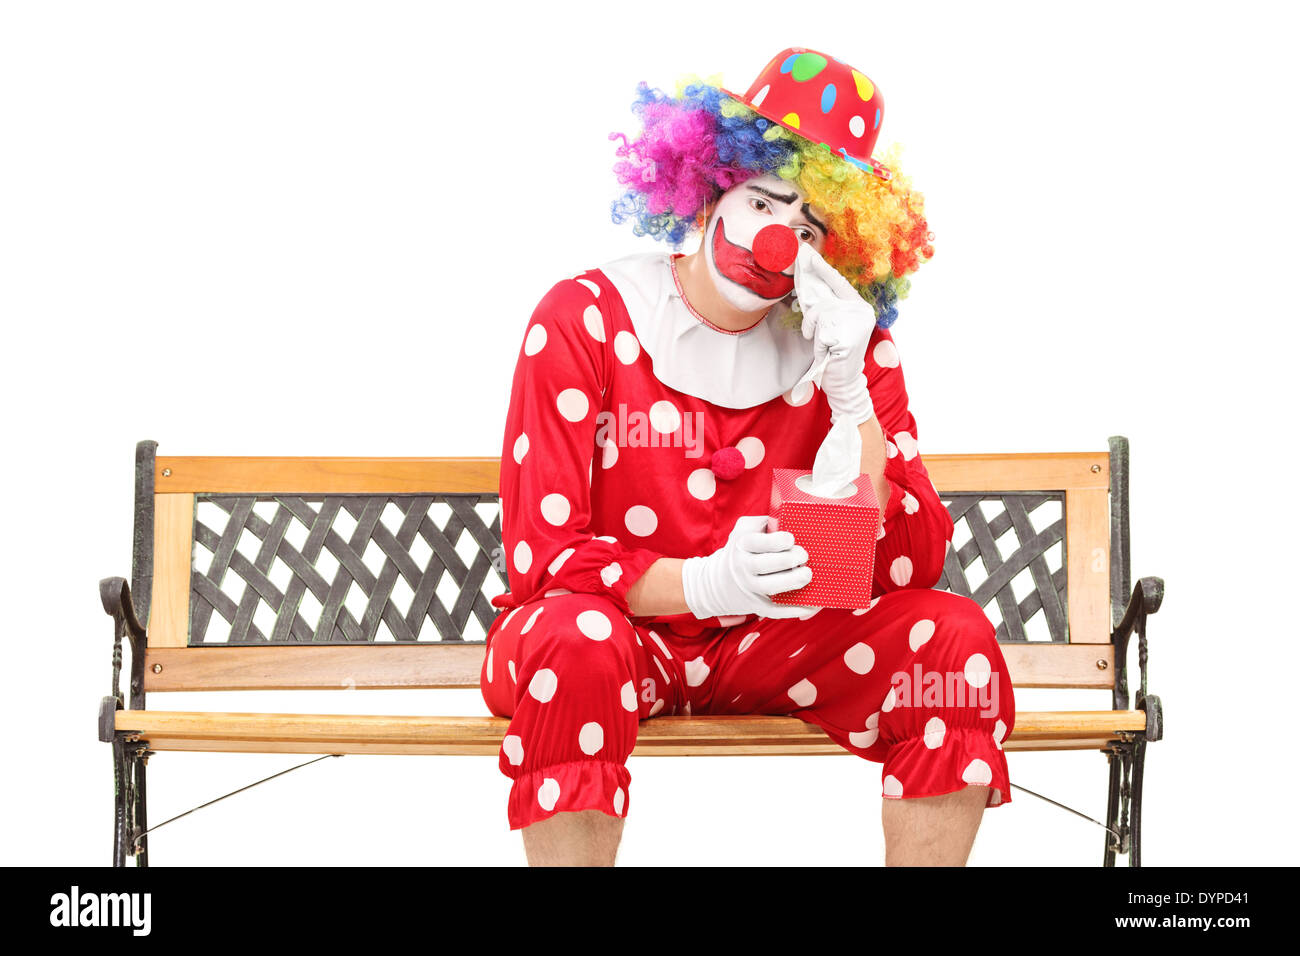 Sad clown wiping his eyes from crying Stock Photo